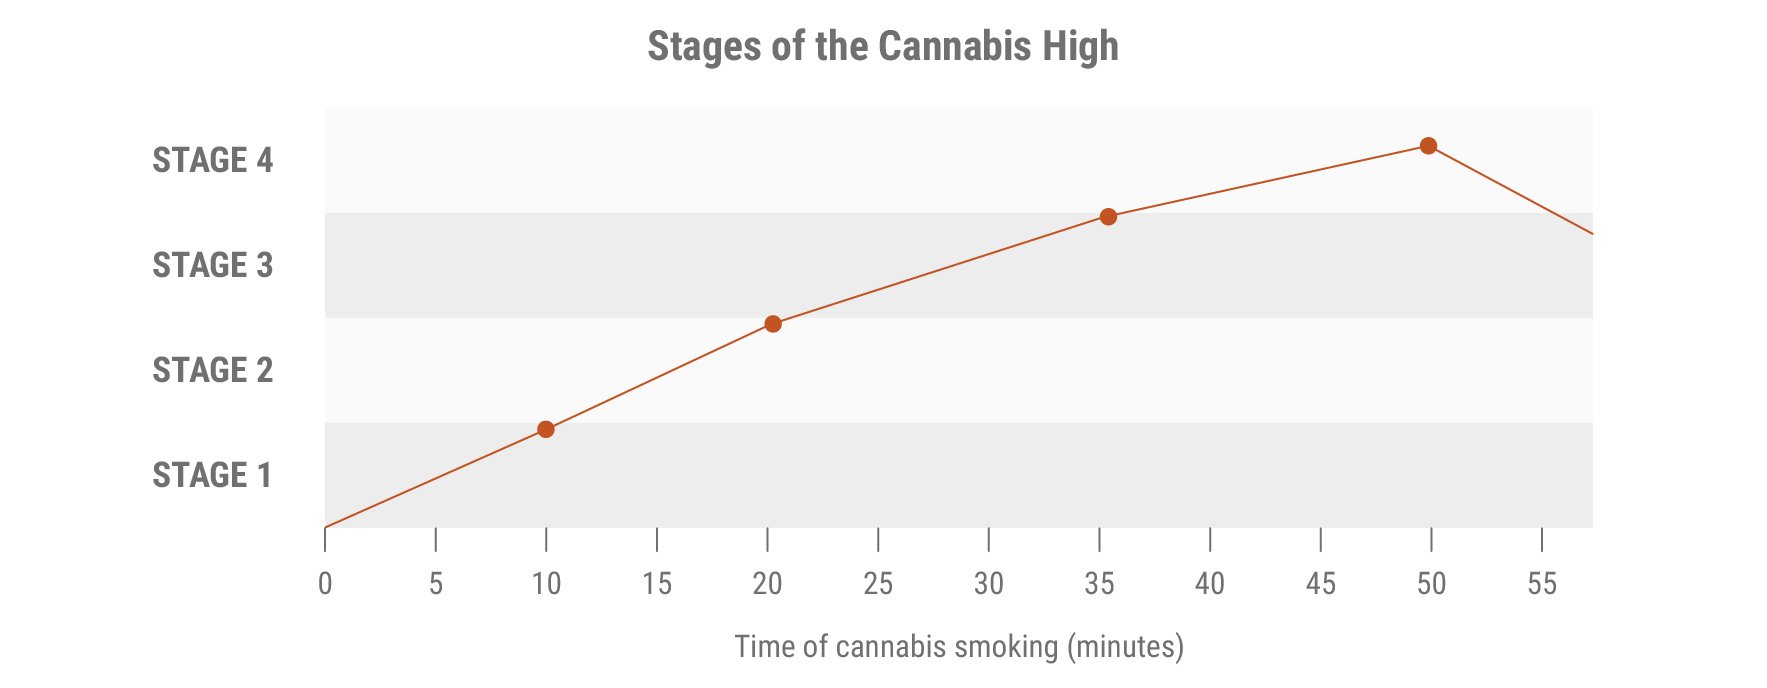 Stages of the Cannabis High